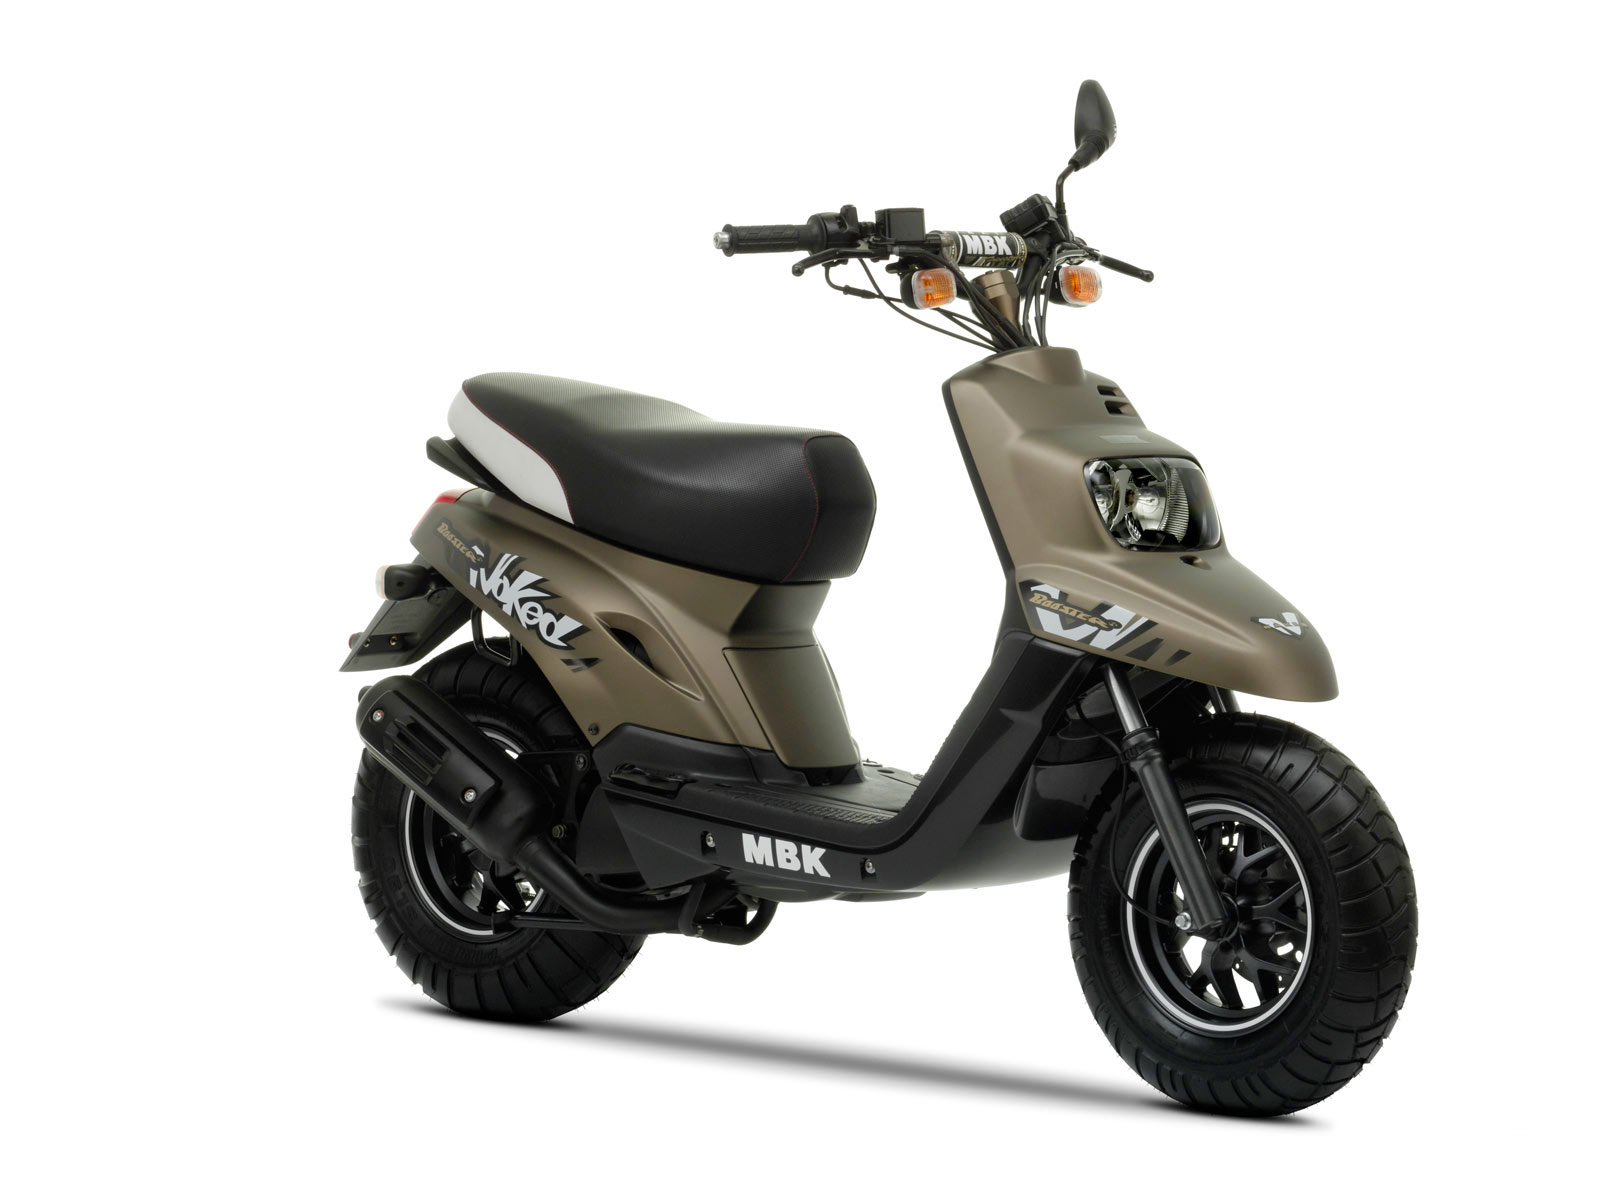 2009 MBK Booster Naked scooter pictures | insurance info